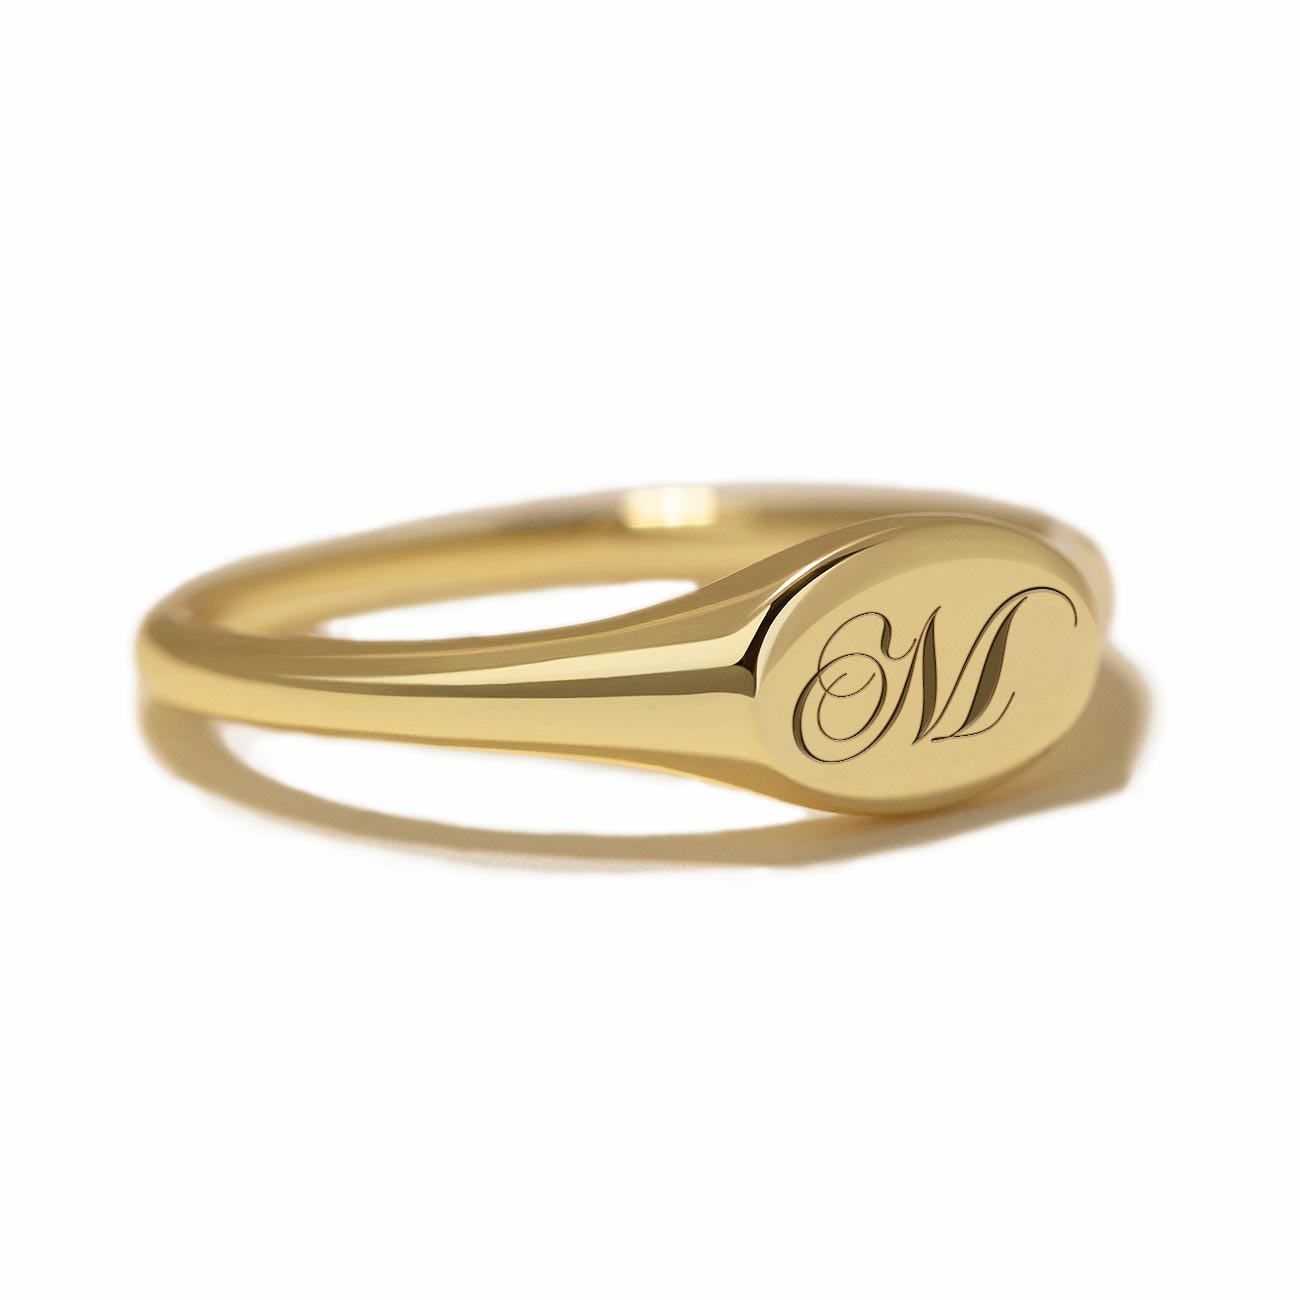 Oval Signet Engraved Ring